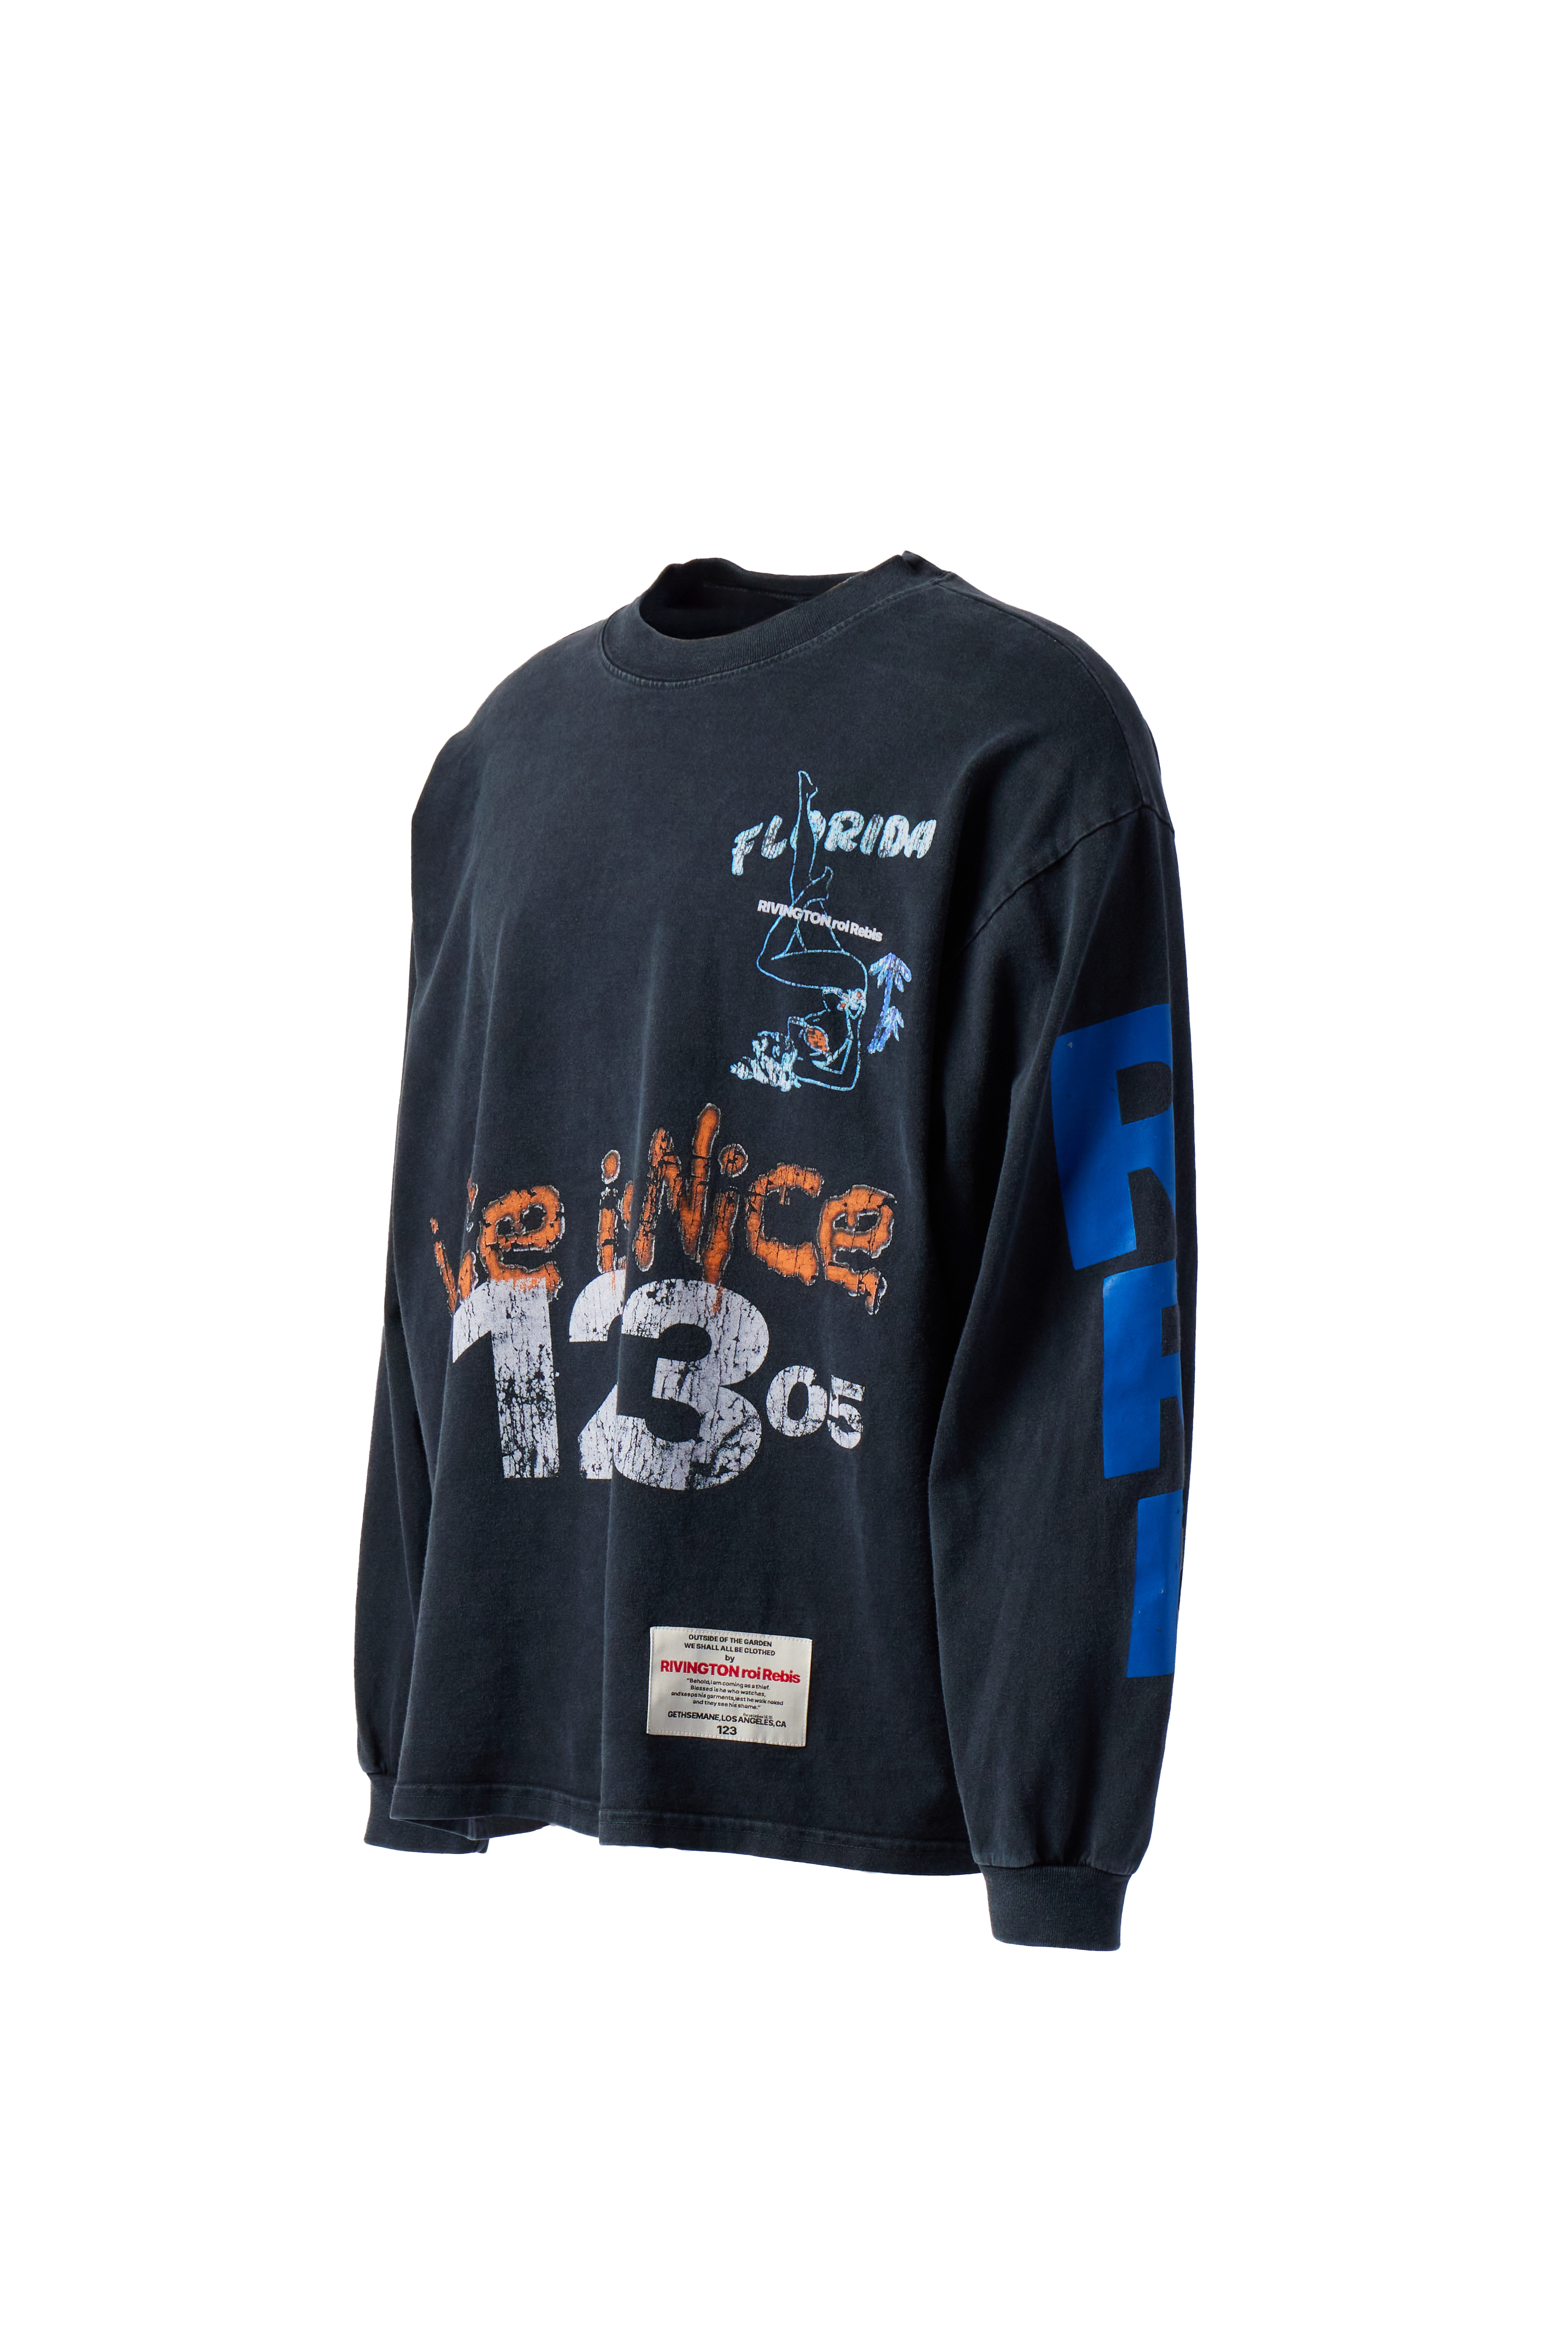 RRR123 - Vice is Nice L/S Tee product image